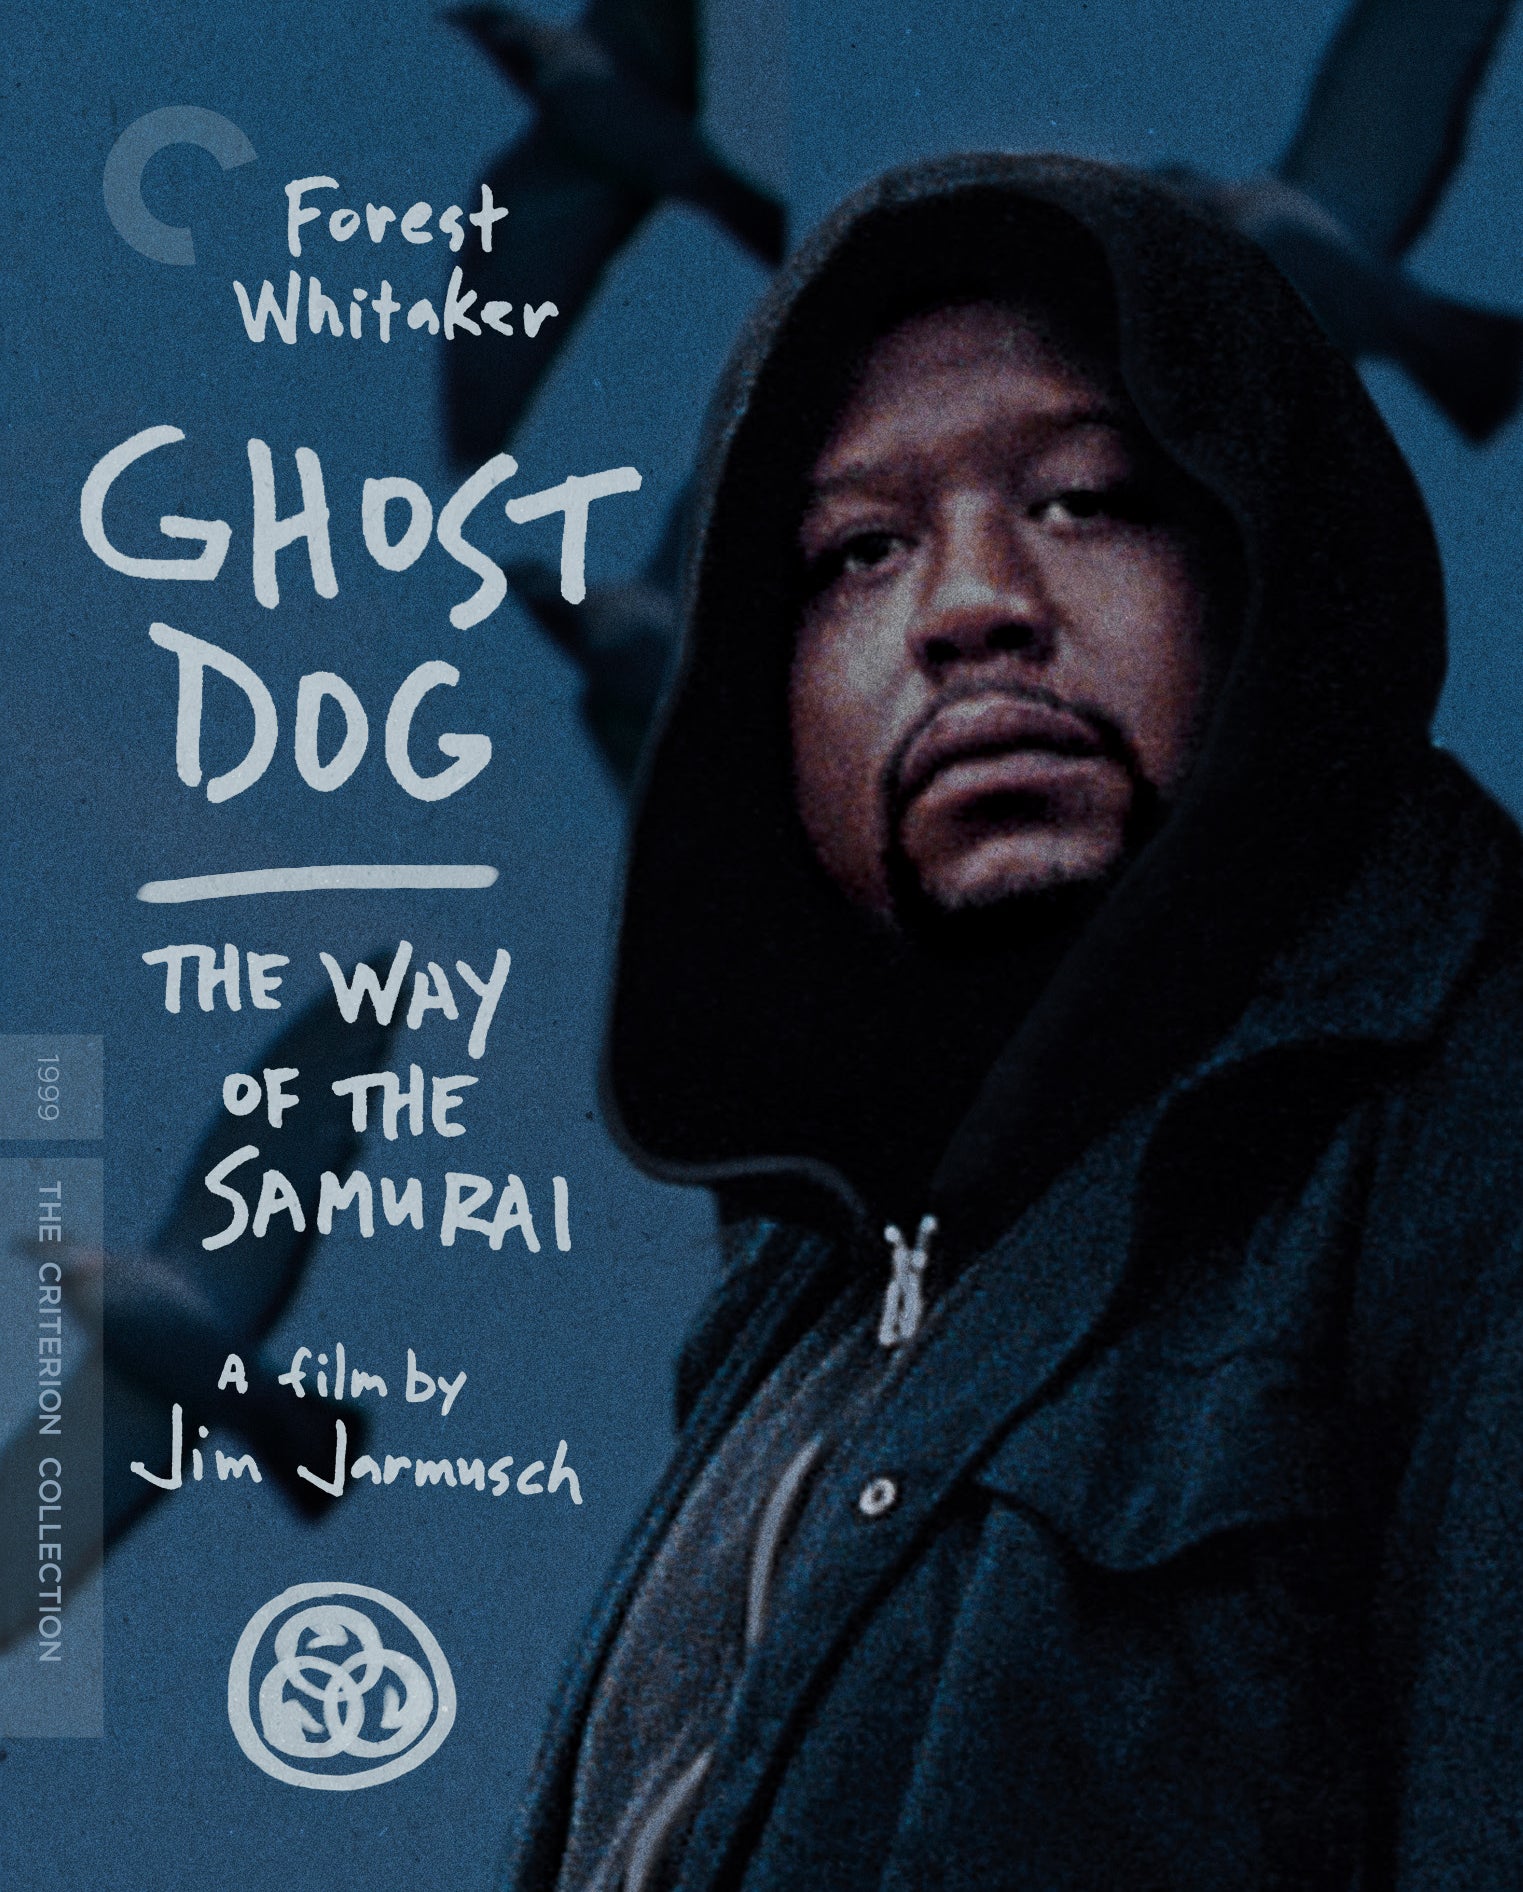 Ghost Dog: The Way of the Samurai [Criterion Collection] [Blu-ray] cover art